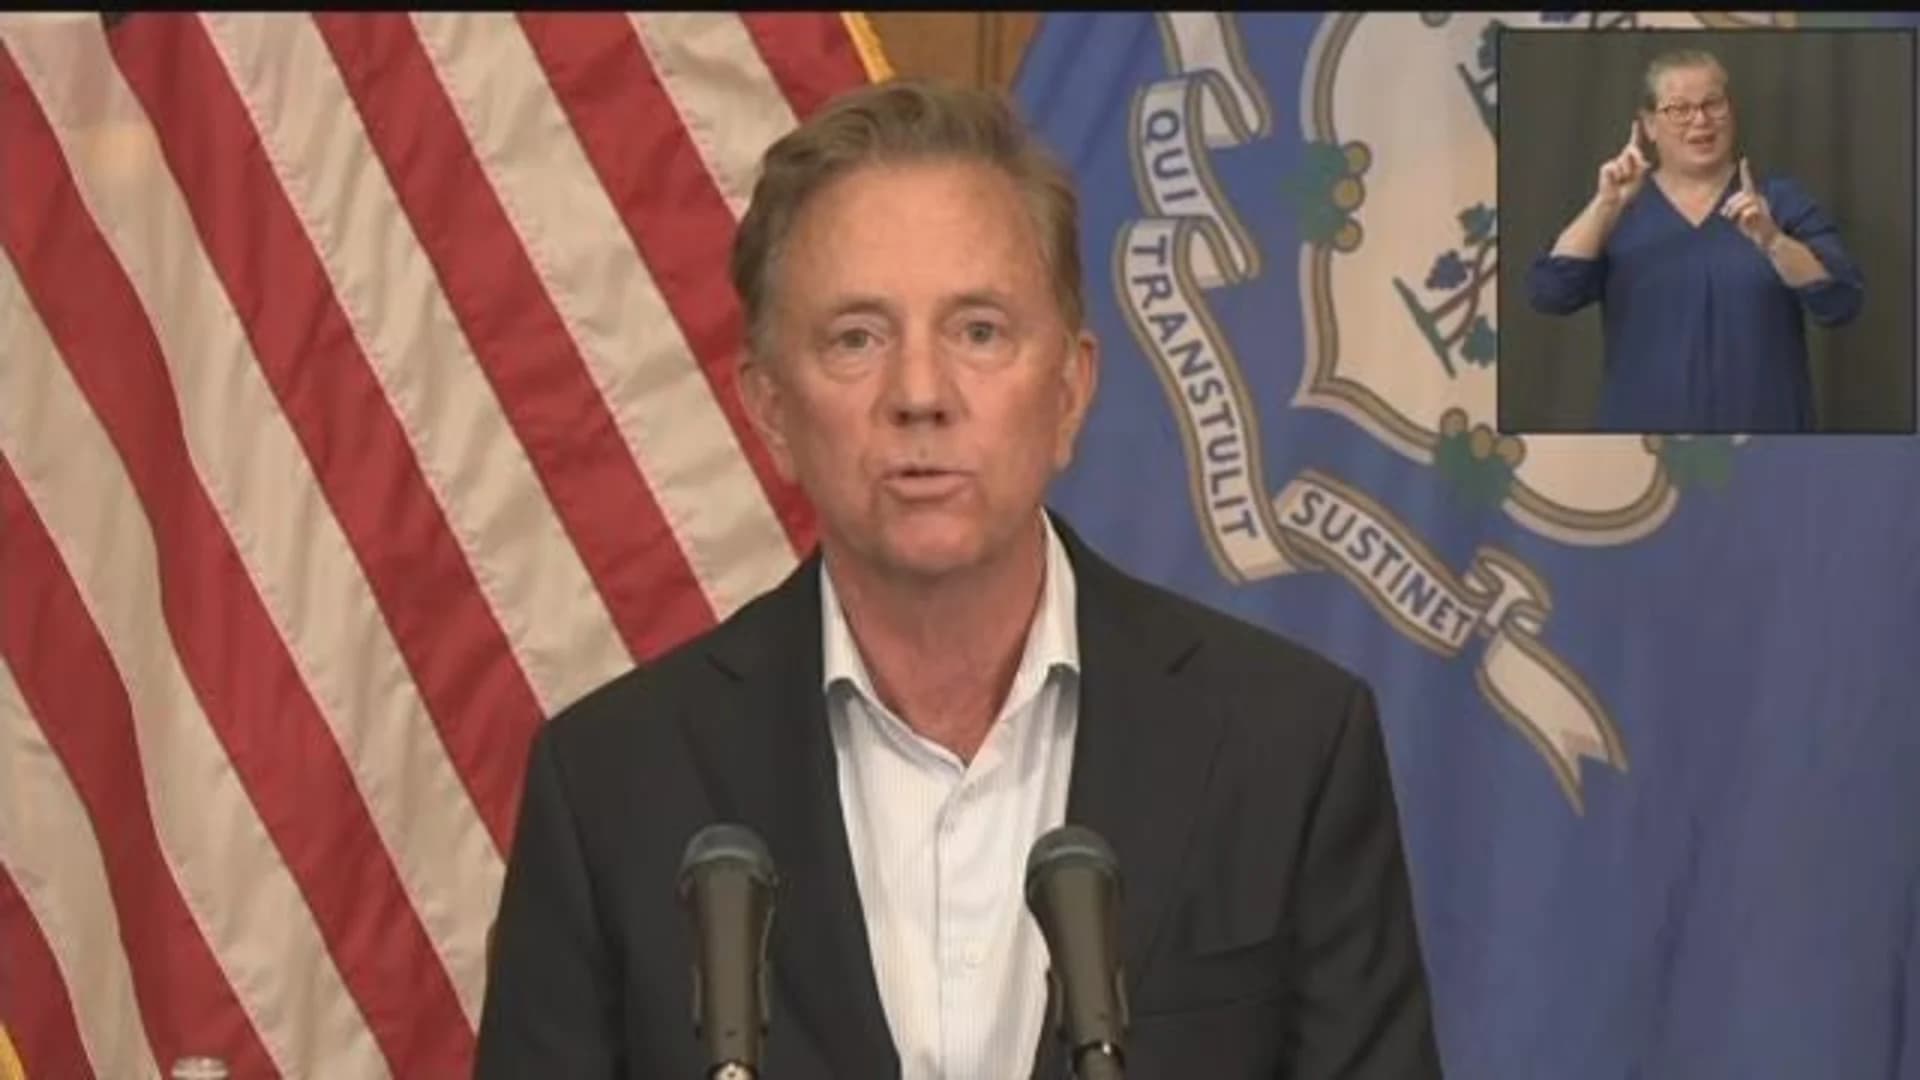 Gov. Lamont says he is extending eviction freeze through Oct. 1